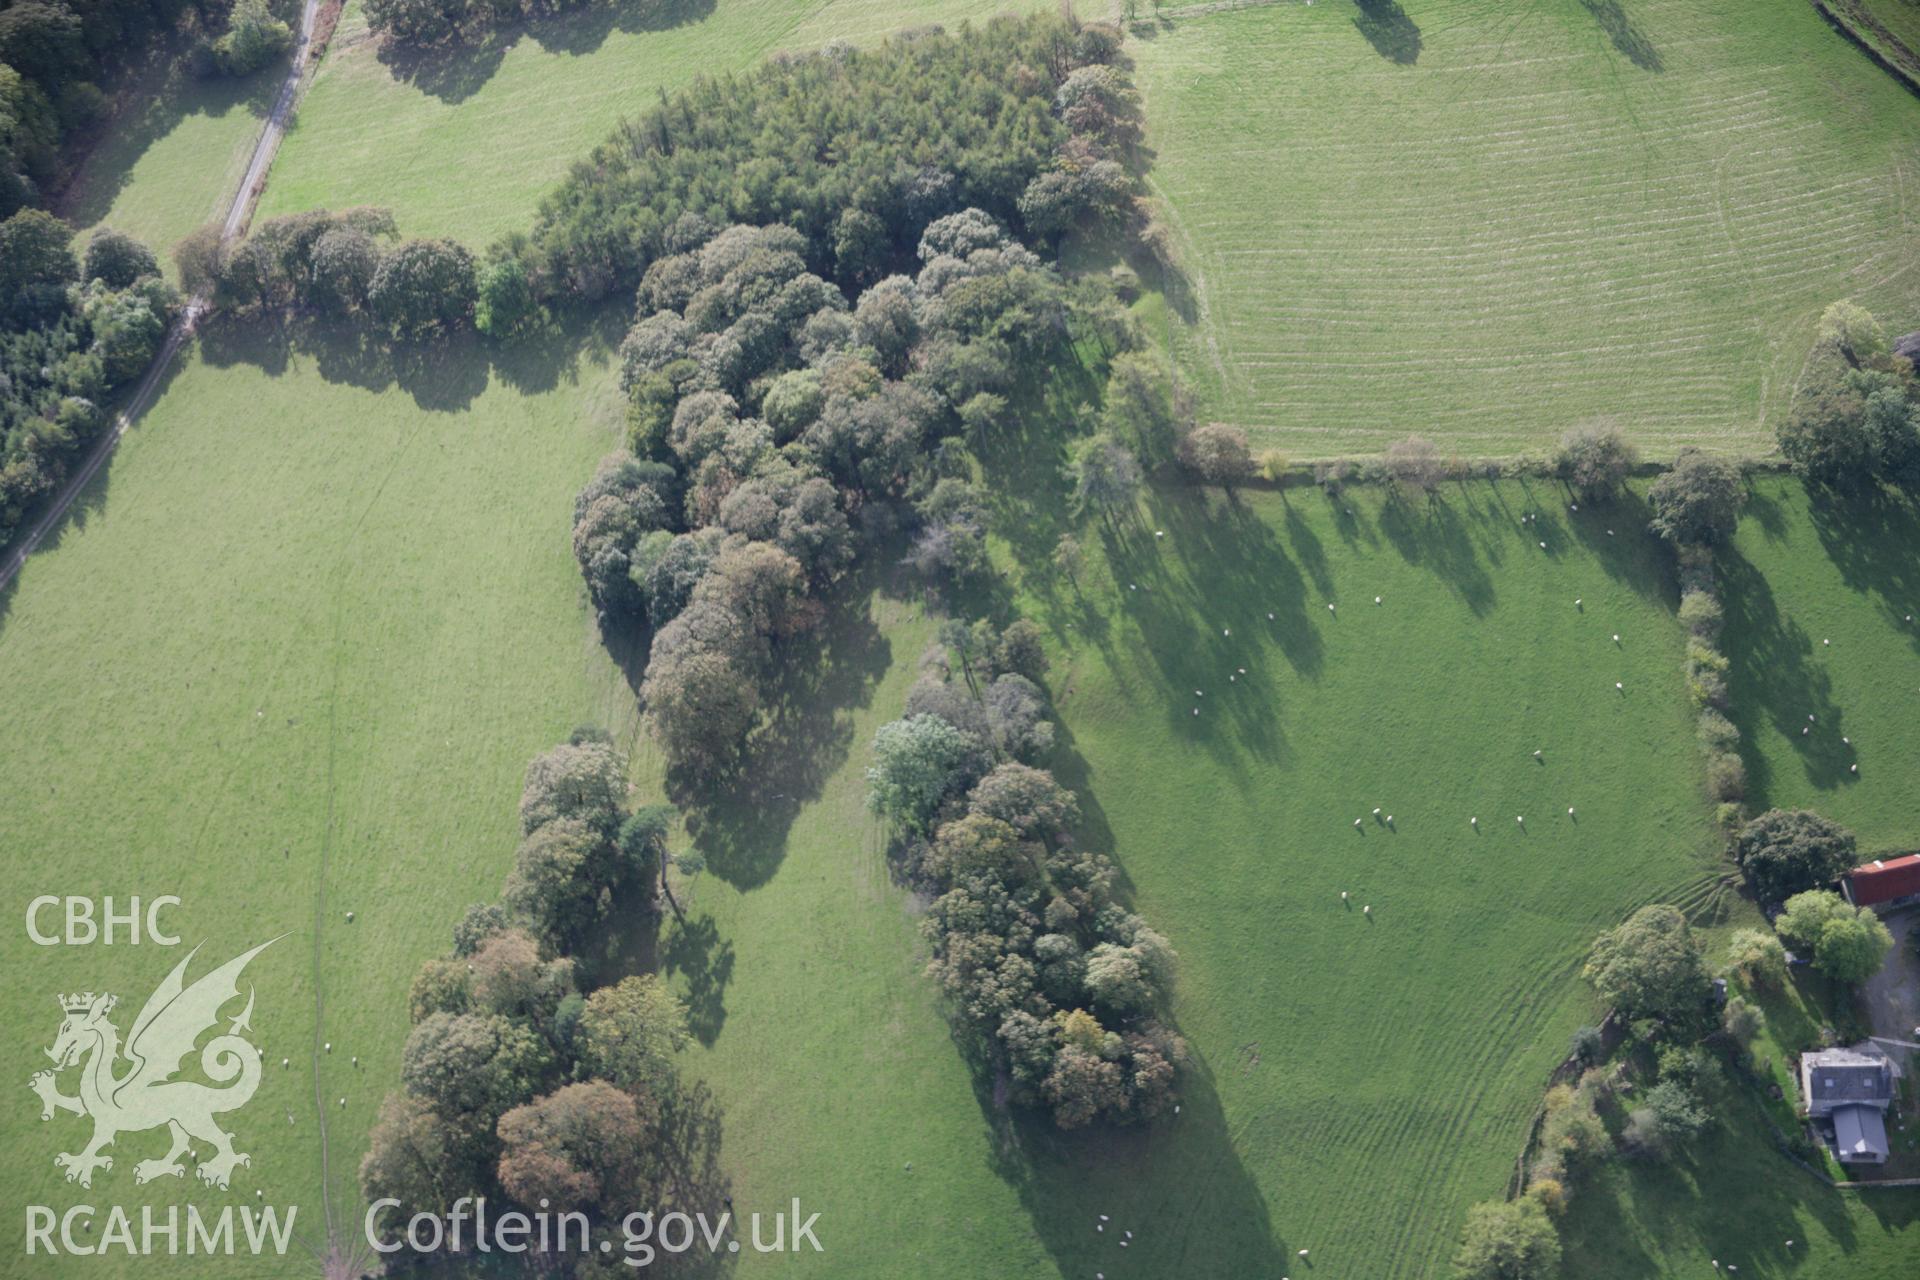 RCAHMW colour oblique aerial photograph of Pen-Llys Enclosure, viewed from the east. Taken on 13 October 2005 by Toby Driver